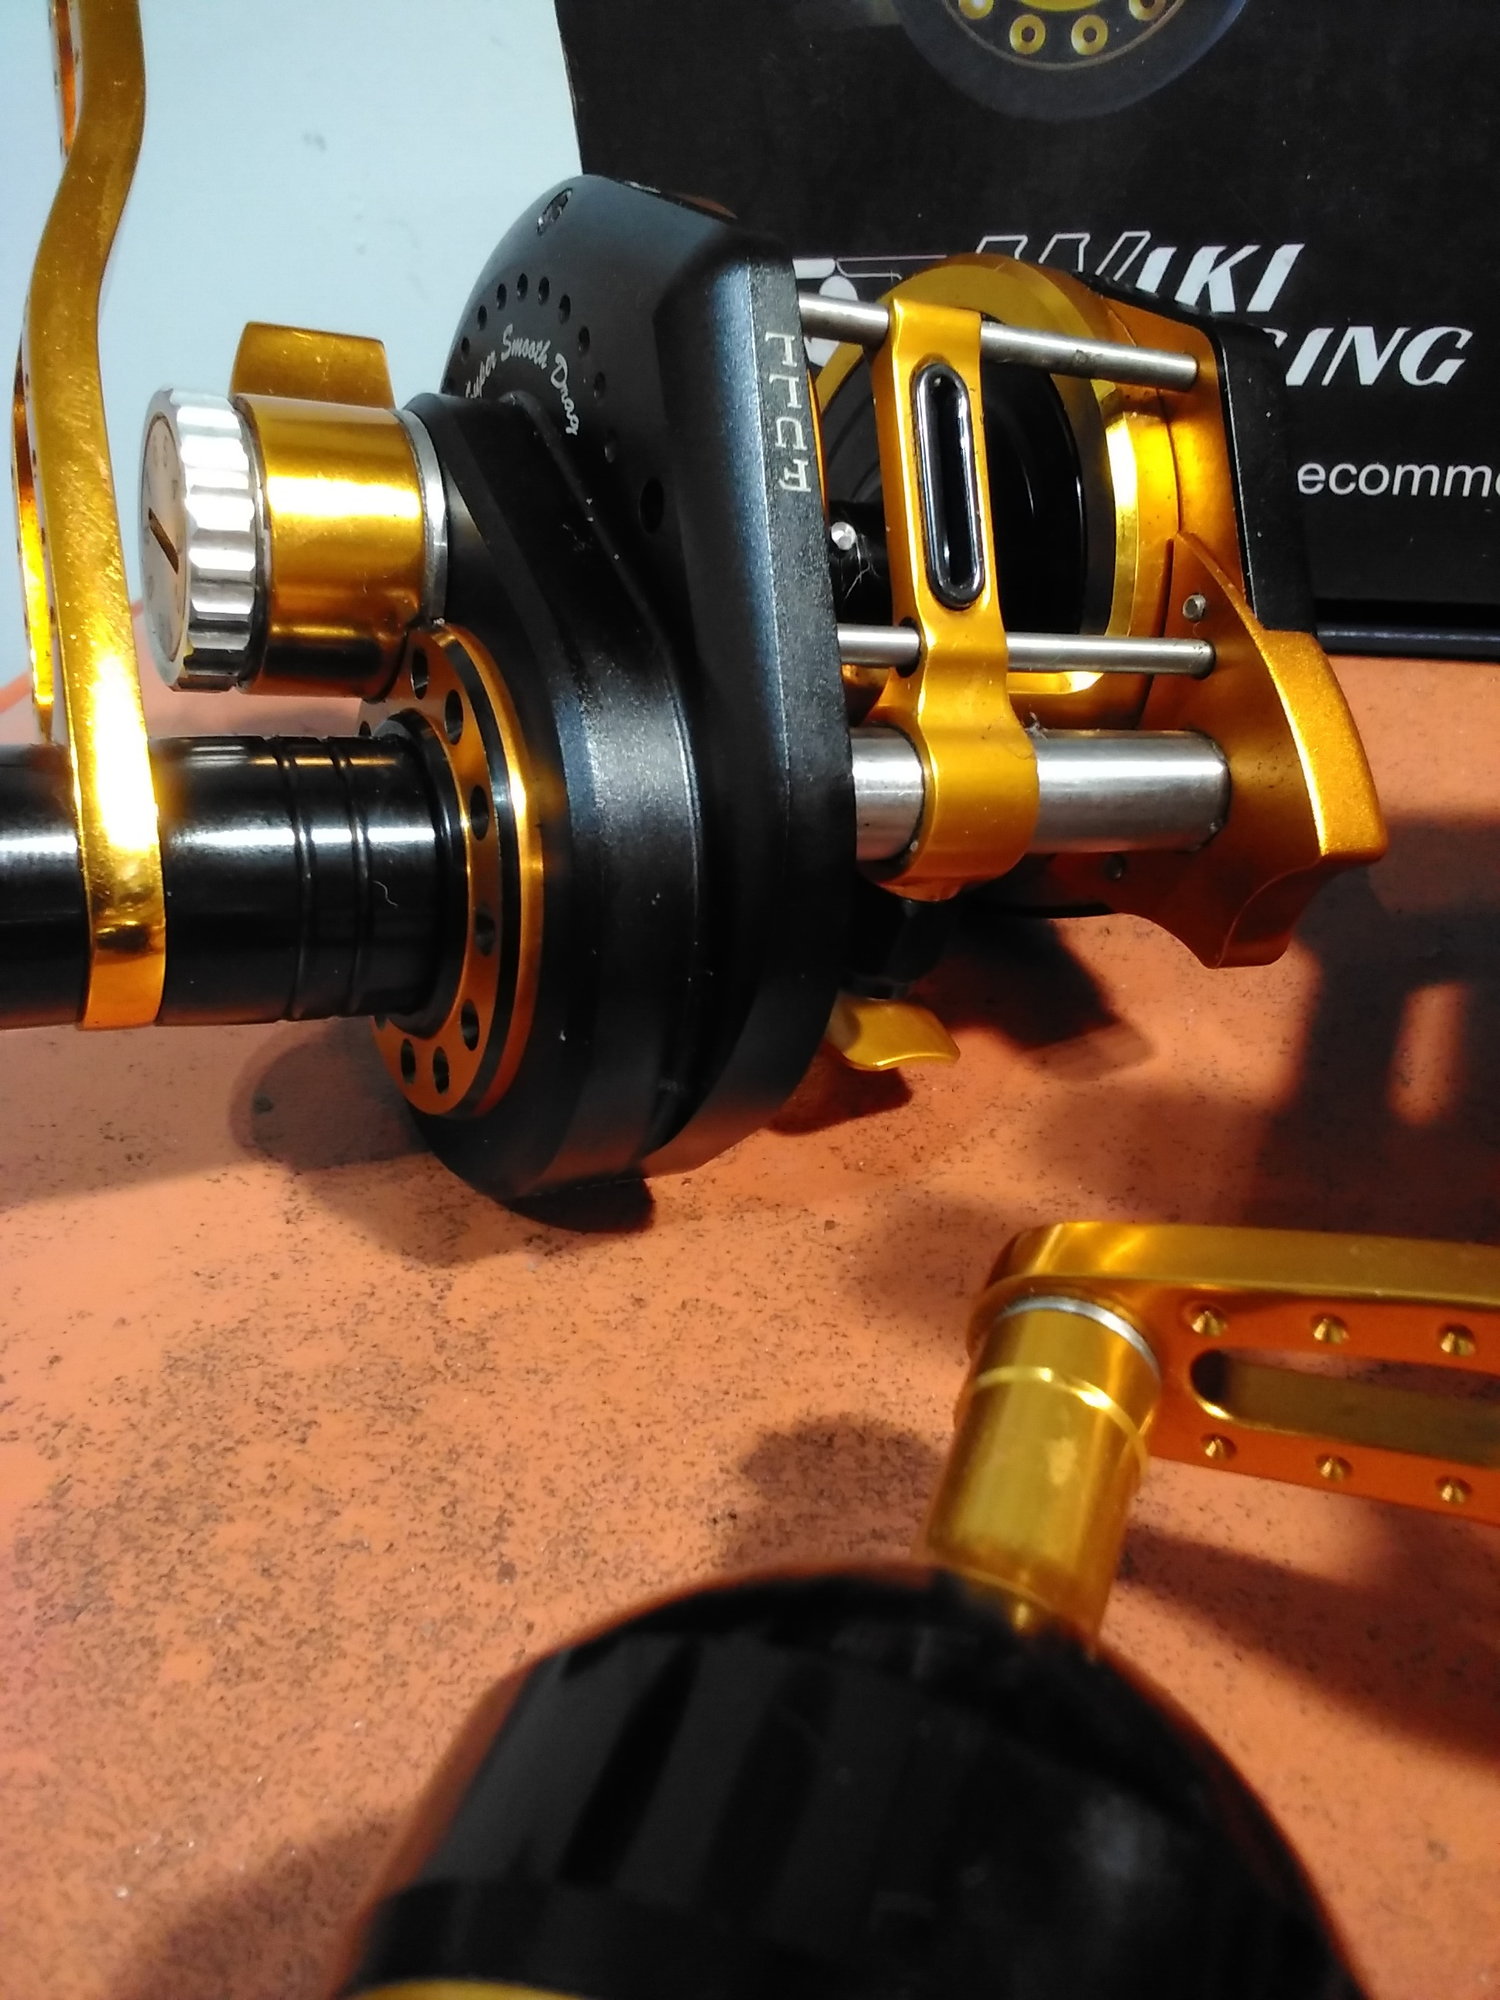 Jigging Master (3) lever drag / levelwind reels - THE BEST - The Hull Truth  - Boating and Fishing Forum